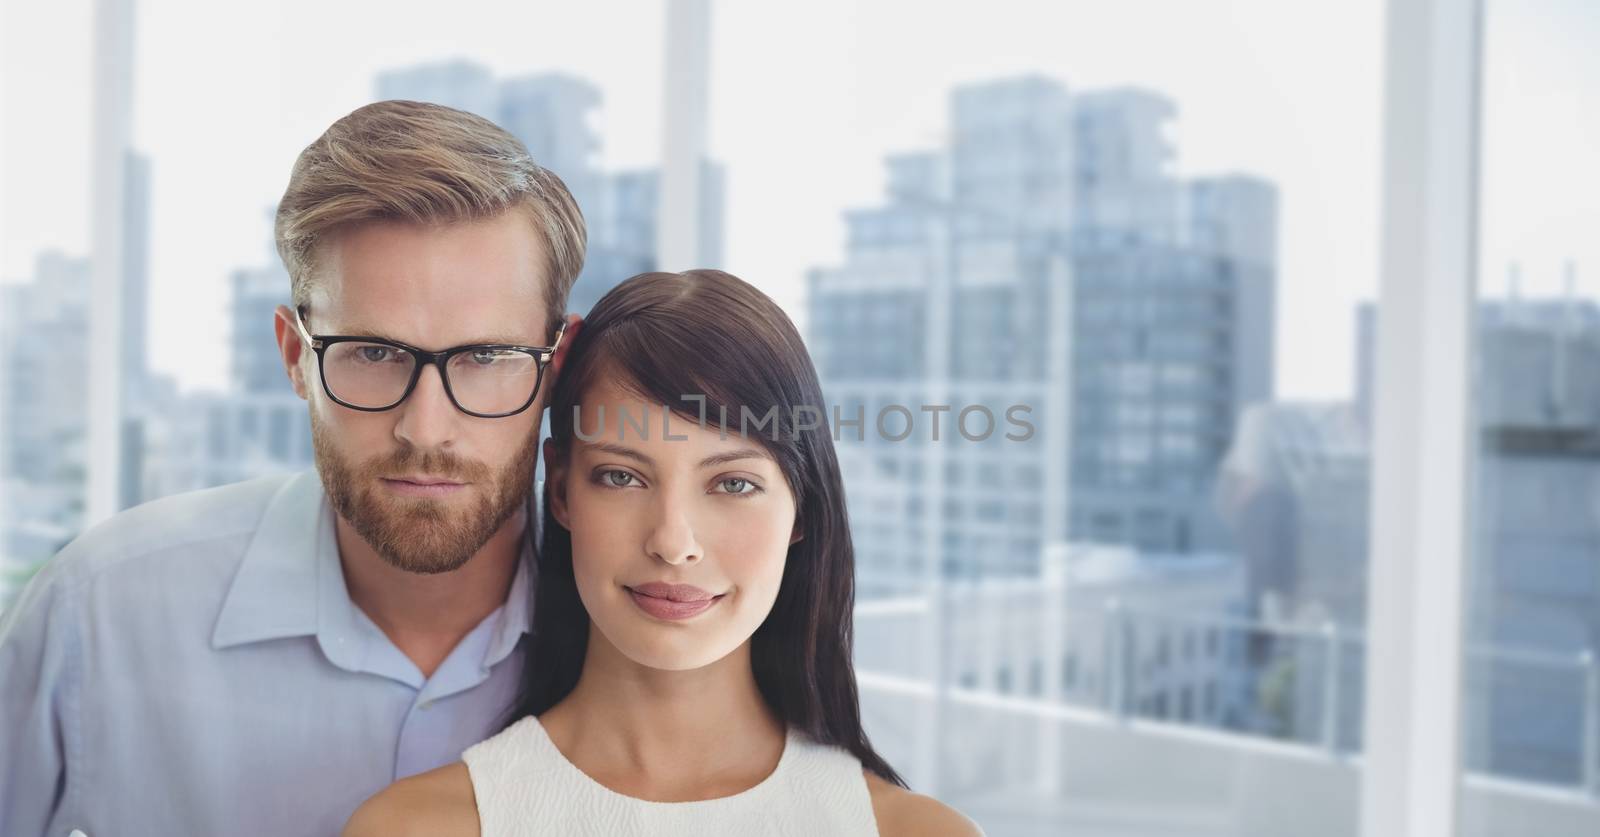 Digital composite of Business people standing